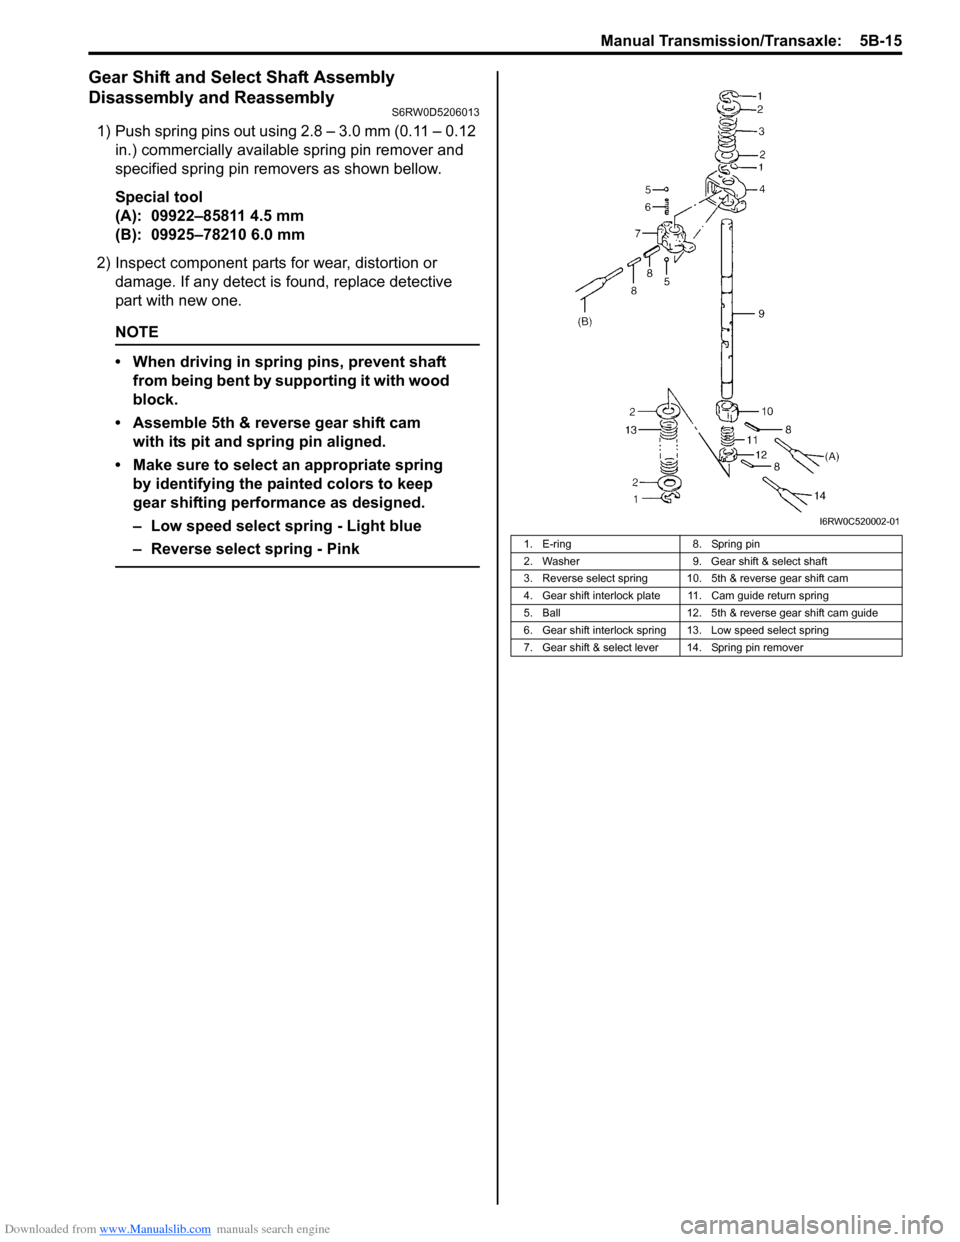 SUZUKI SX4 2006 1.G Service Workshop Manual Downloaded from www.Manualslib.com manuals search engine Manual Transmission/Transaxle:  5B-15
Gear Shift and Select Shaft Assembly 
Disassembly and Reassembly
S6RW0D5206013
1) Push spring pins out us